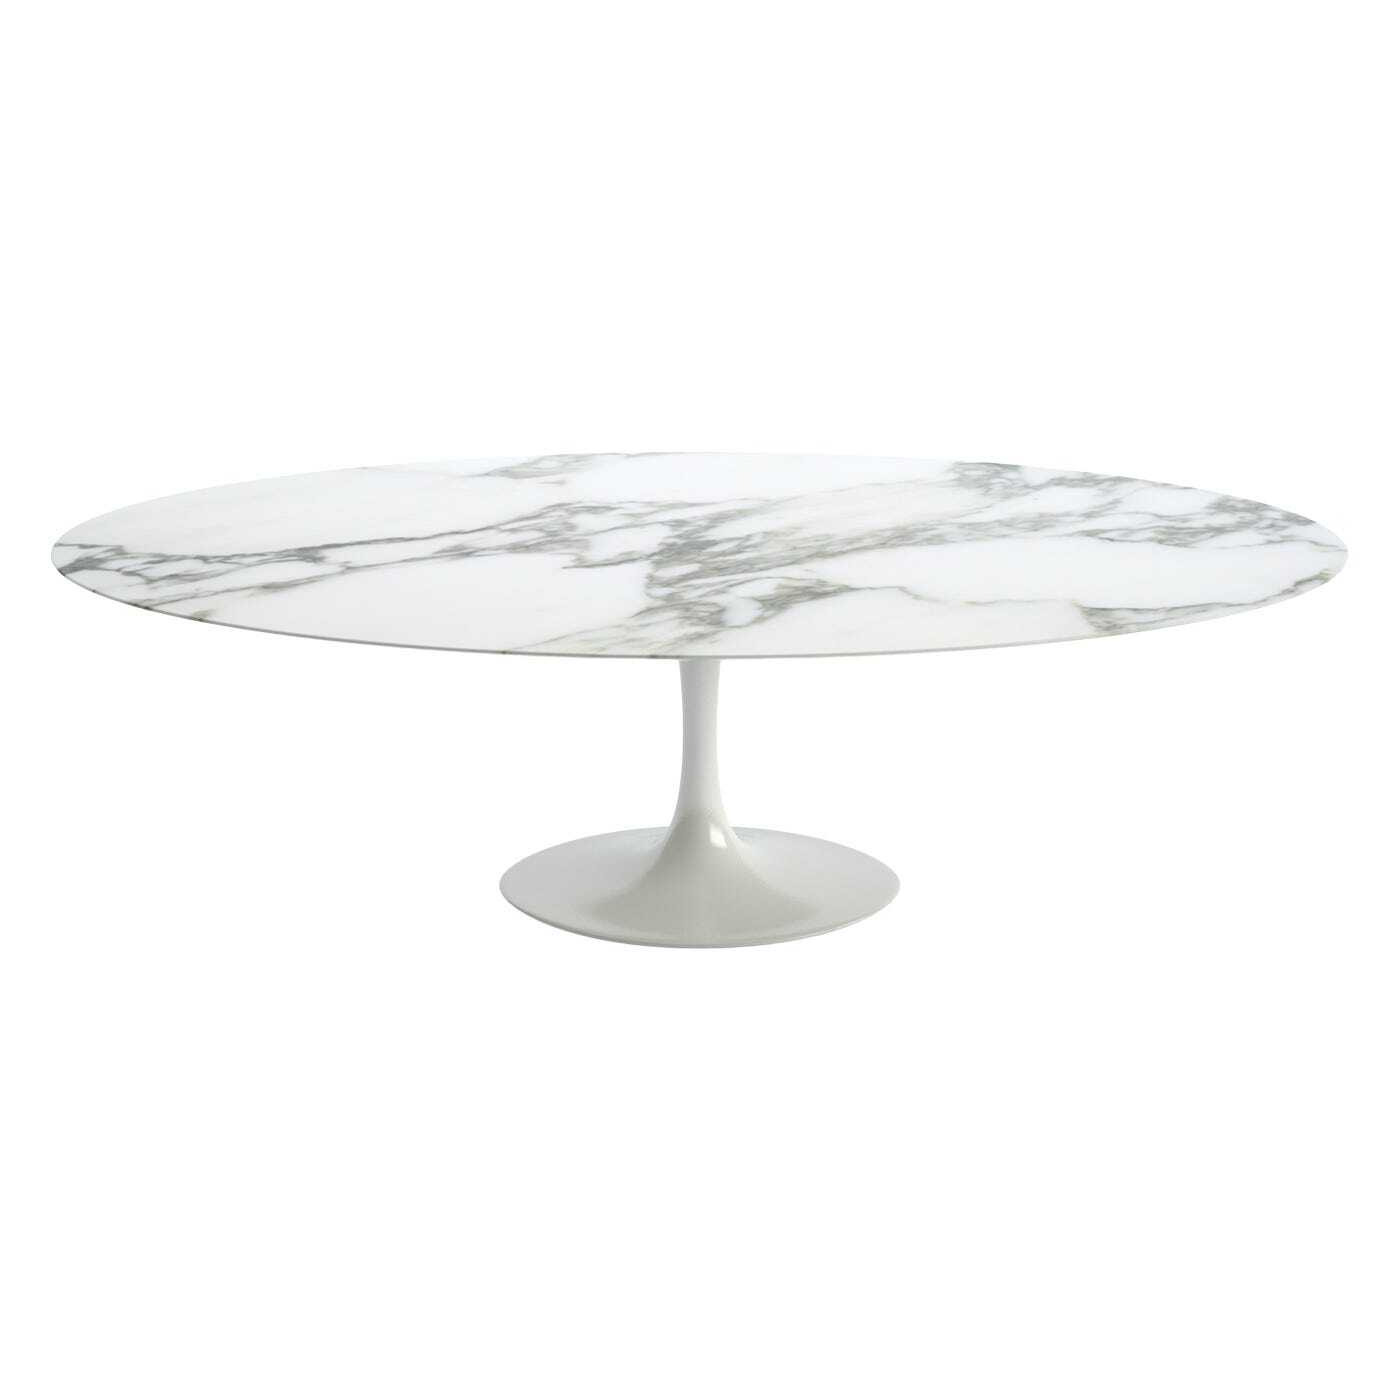 Knoll Saarinen Dining Table with White Base in Arabescato 244cm - image 1